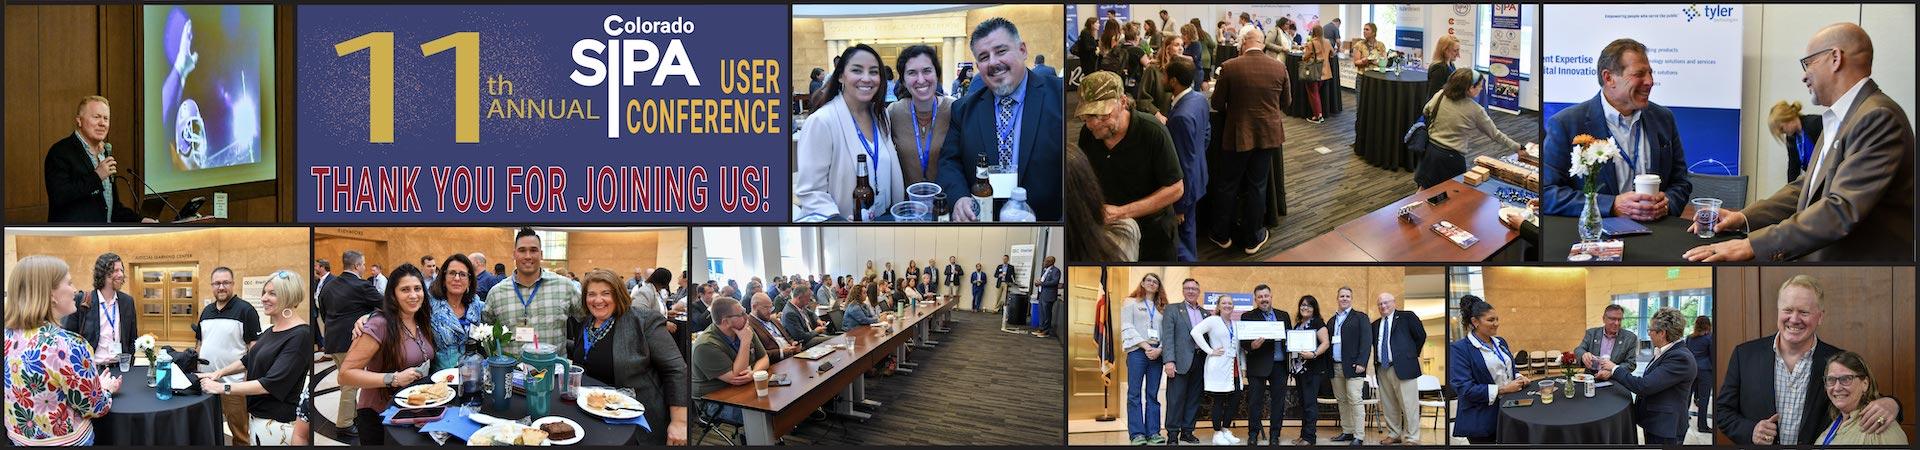 a collage of photographs from the 11th Annual SIPA User Conference